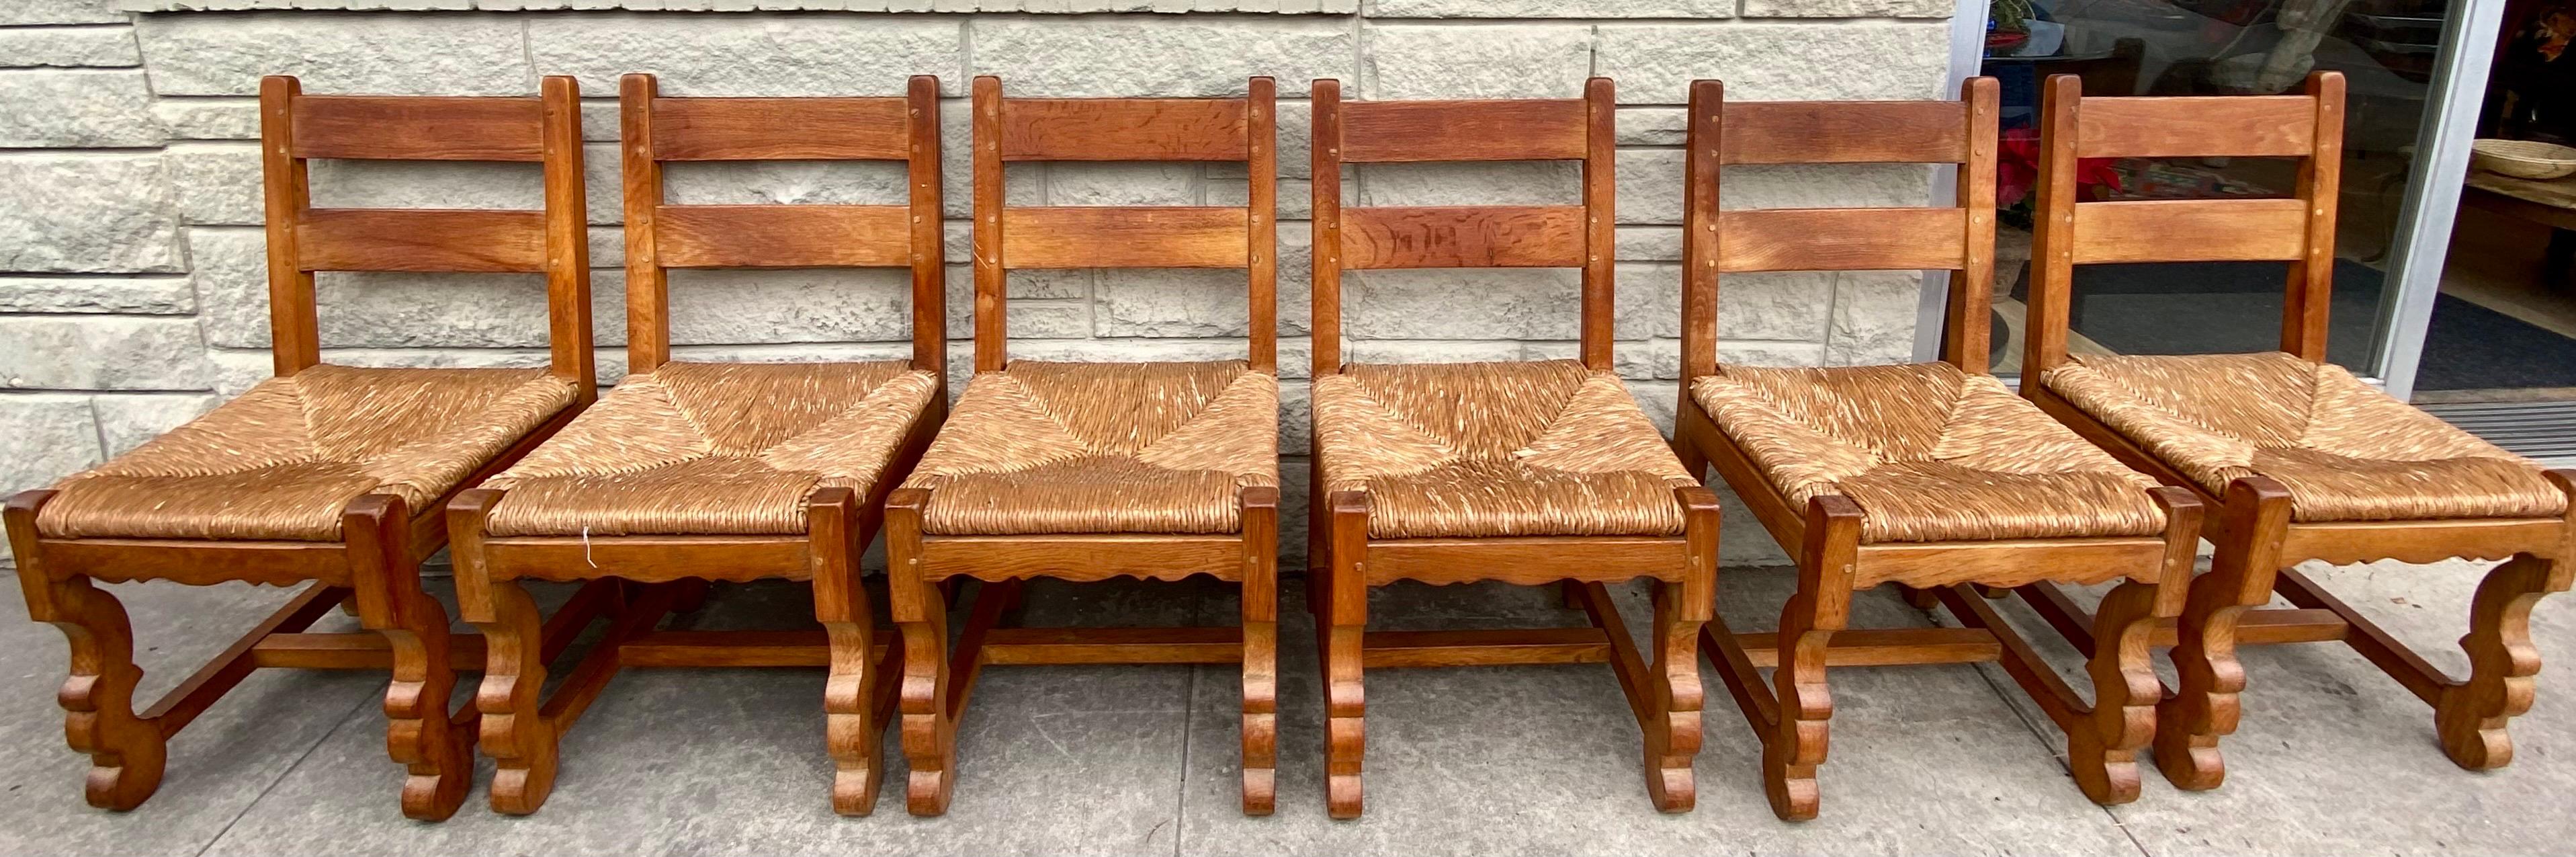 Set of 6 solid oak brutalist dining chairs with rush seats, France, circa 1960s. 
Dimensions: 19